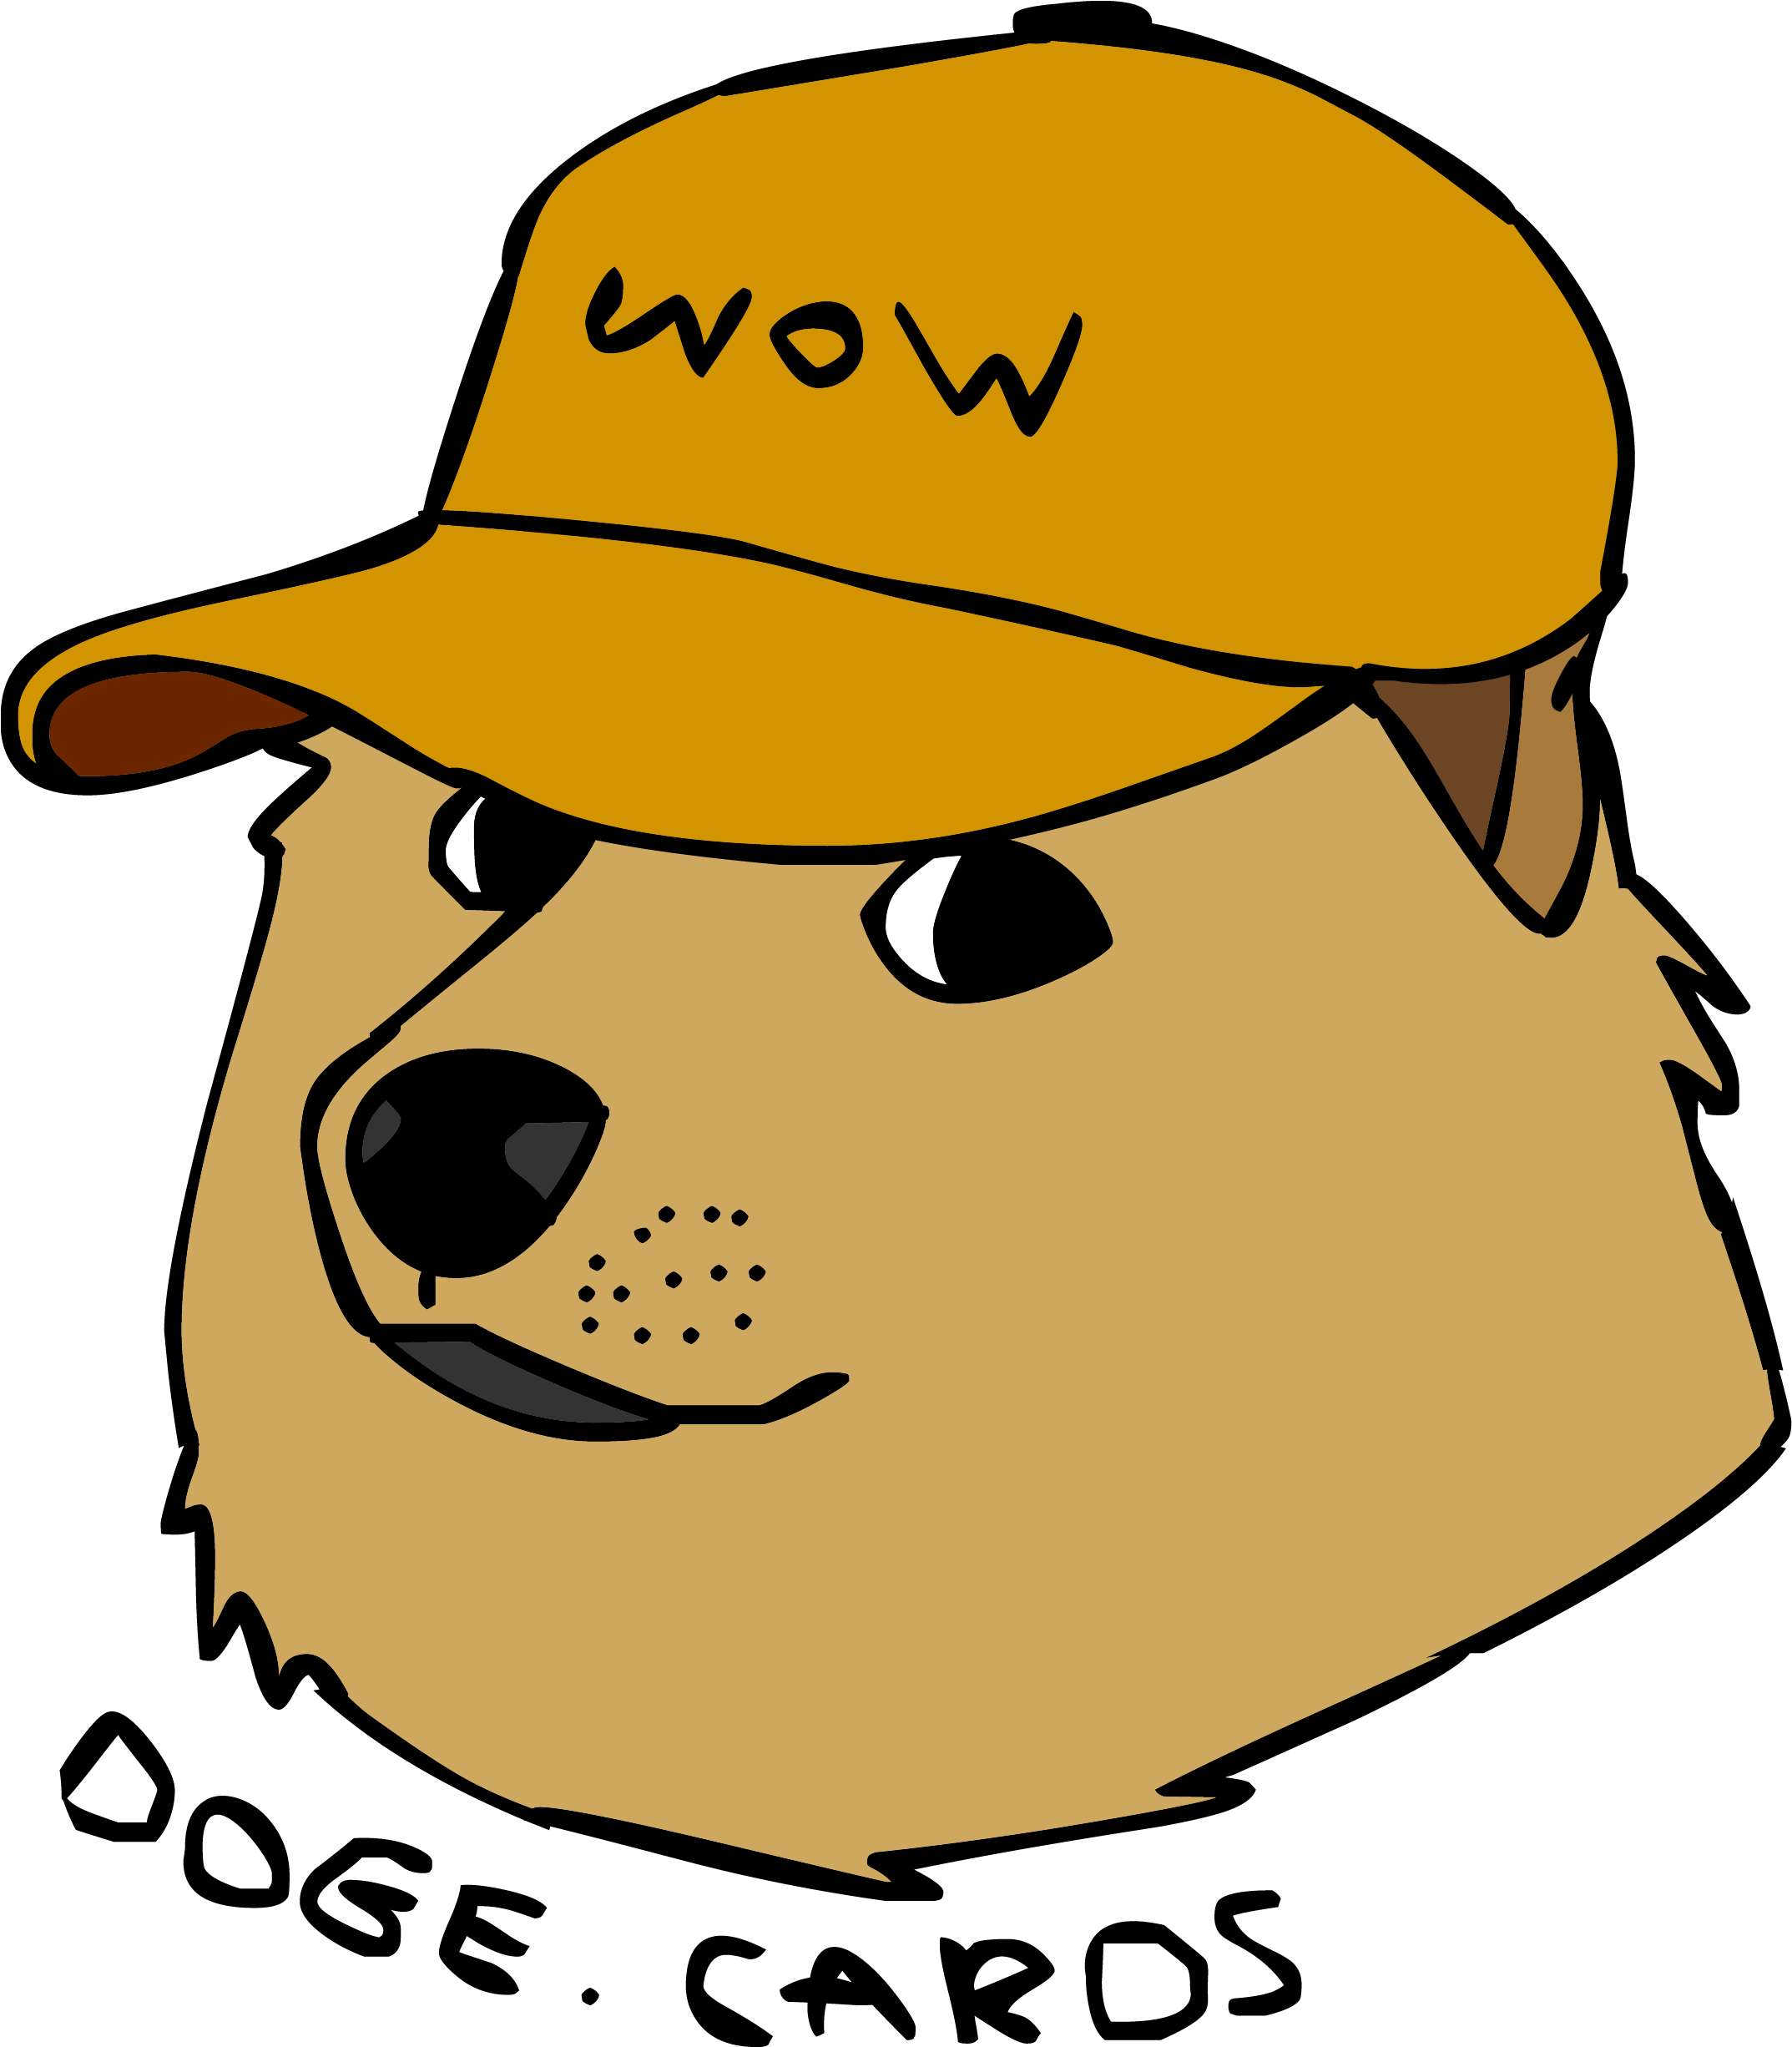 I Drew A Quick Vector Doge Mascot For Doge - Doge Vector (2173x2550)